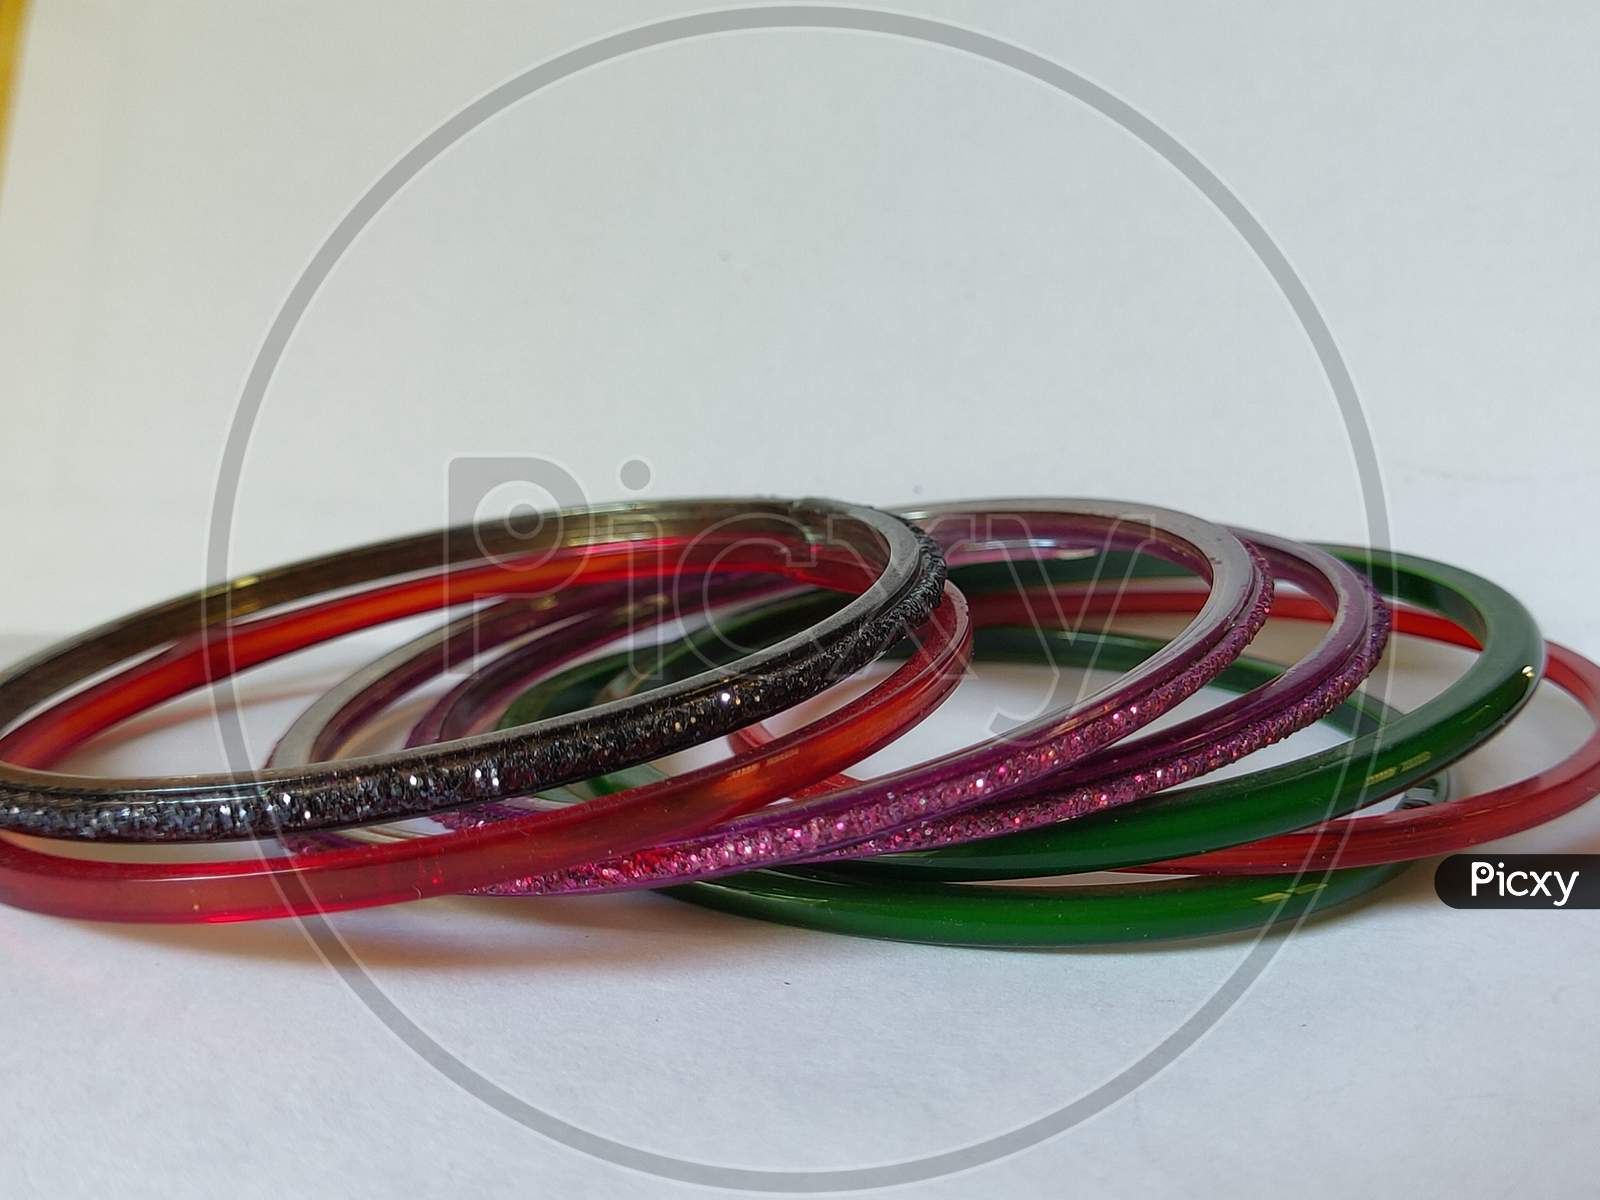 Colorful bangles on plain background. Glass bangles on white background. Bangles with close view.